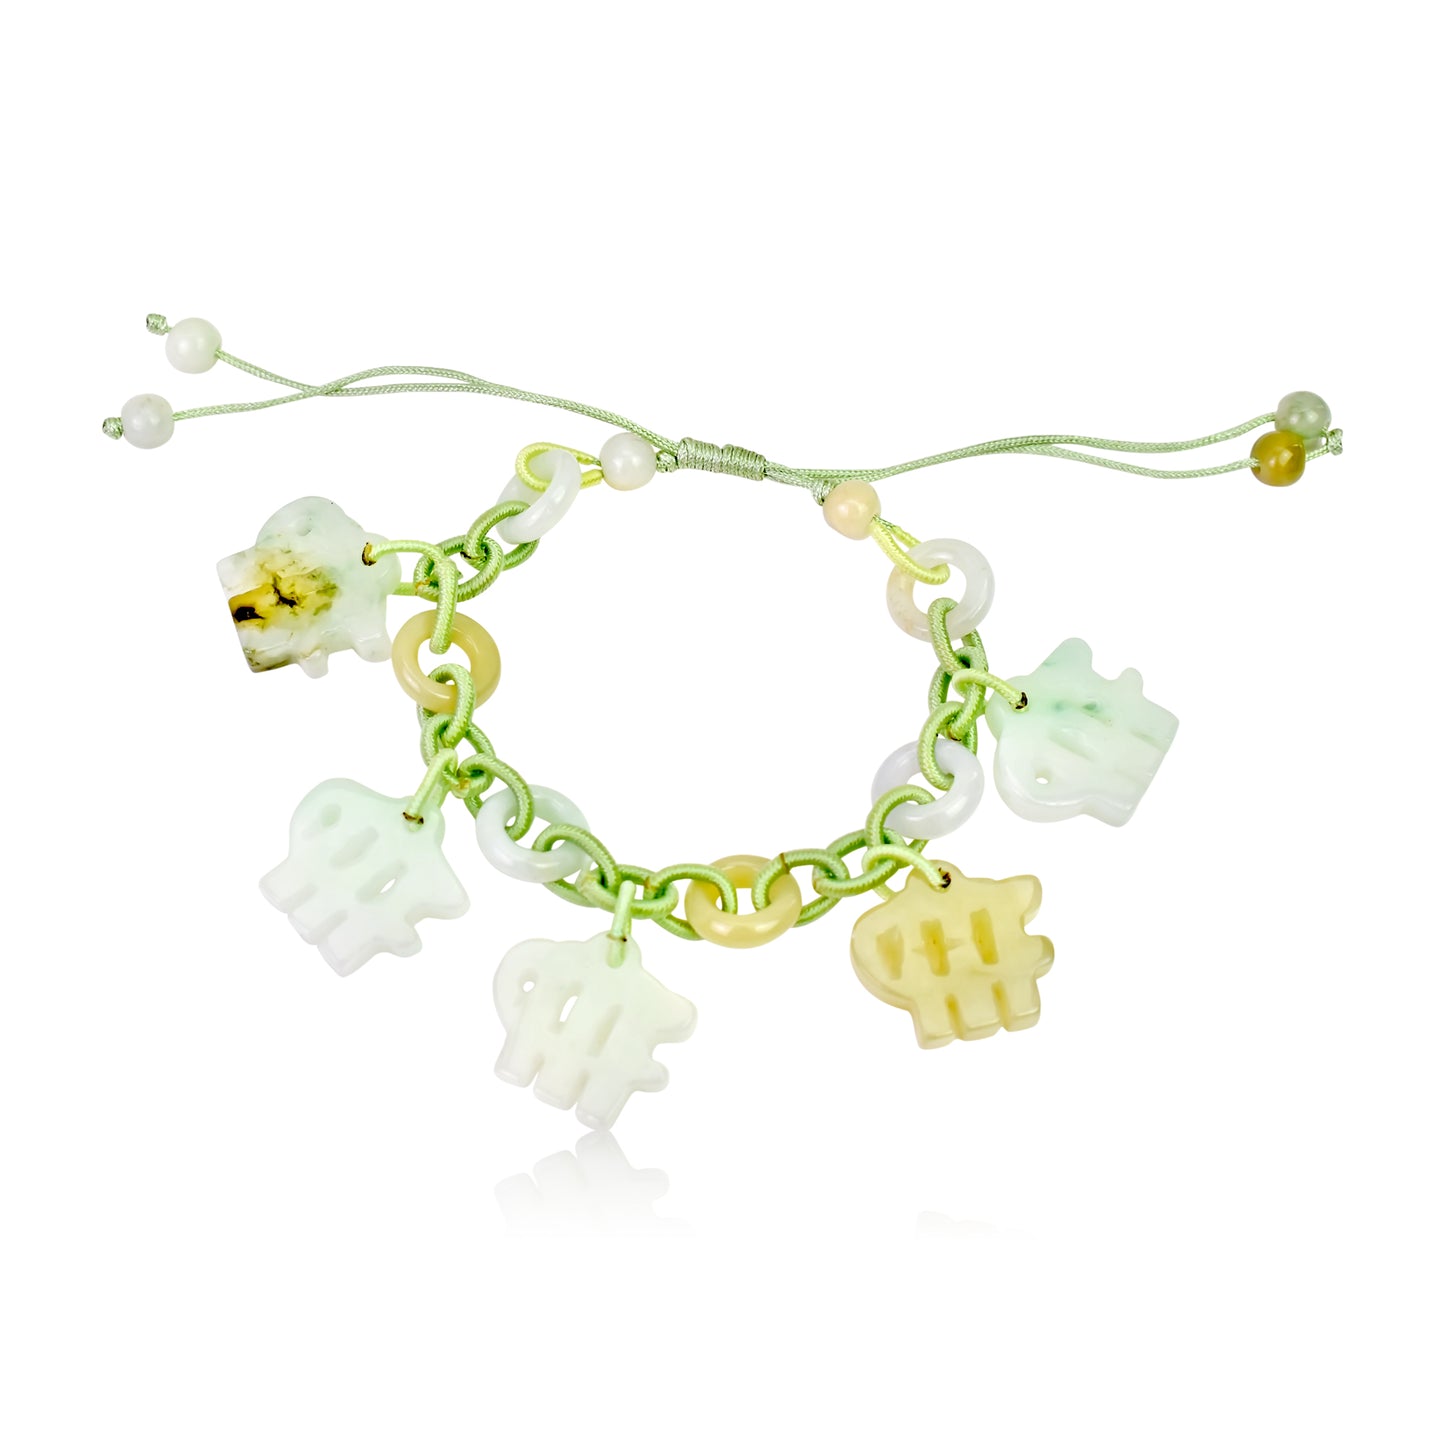 A Perfect Gift for the Methodical Virgo with this Jade Bracelet made with Sea Green Cord